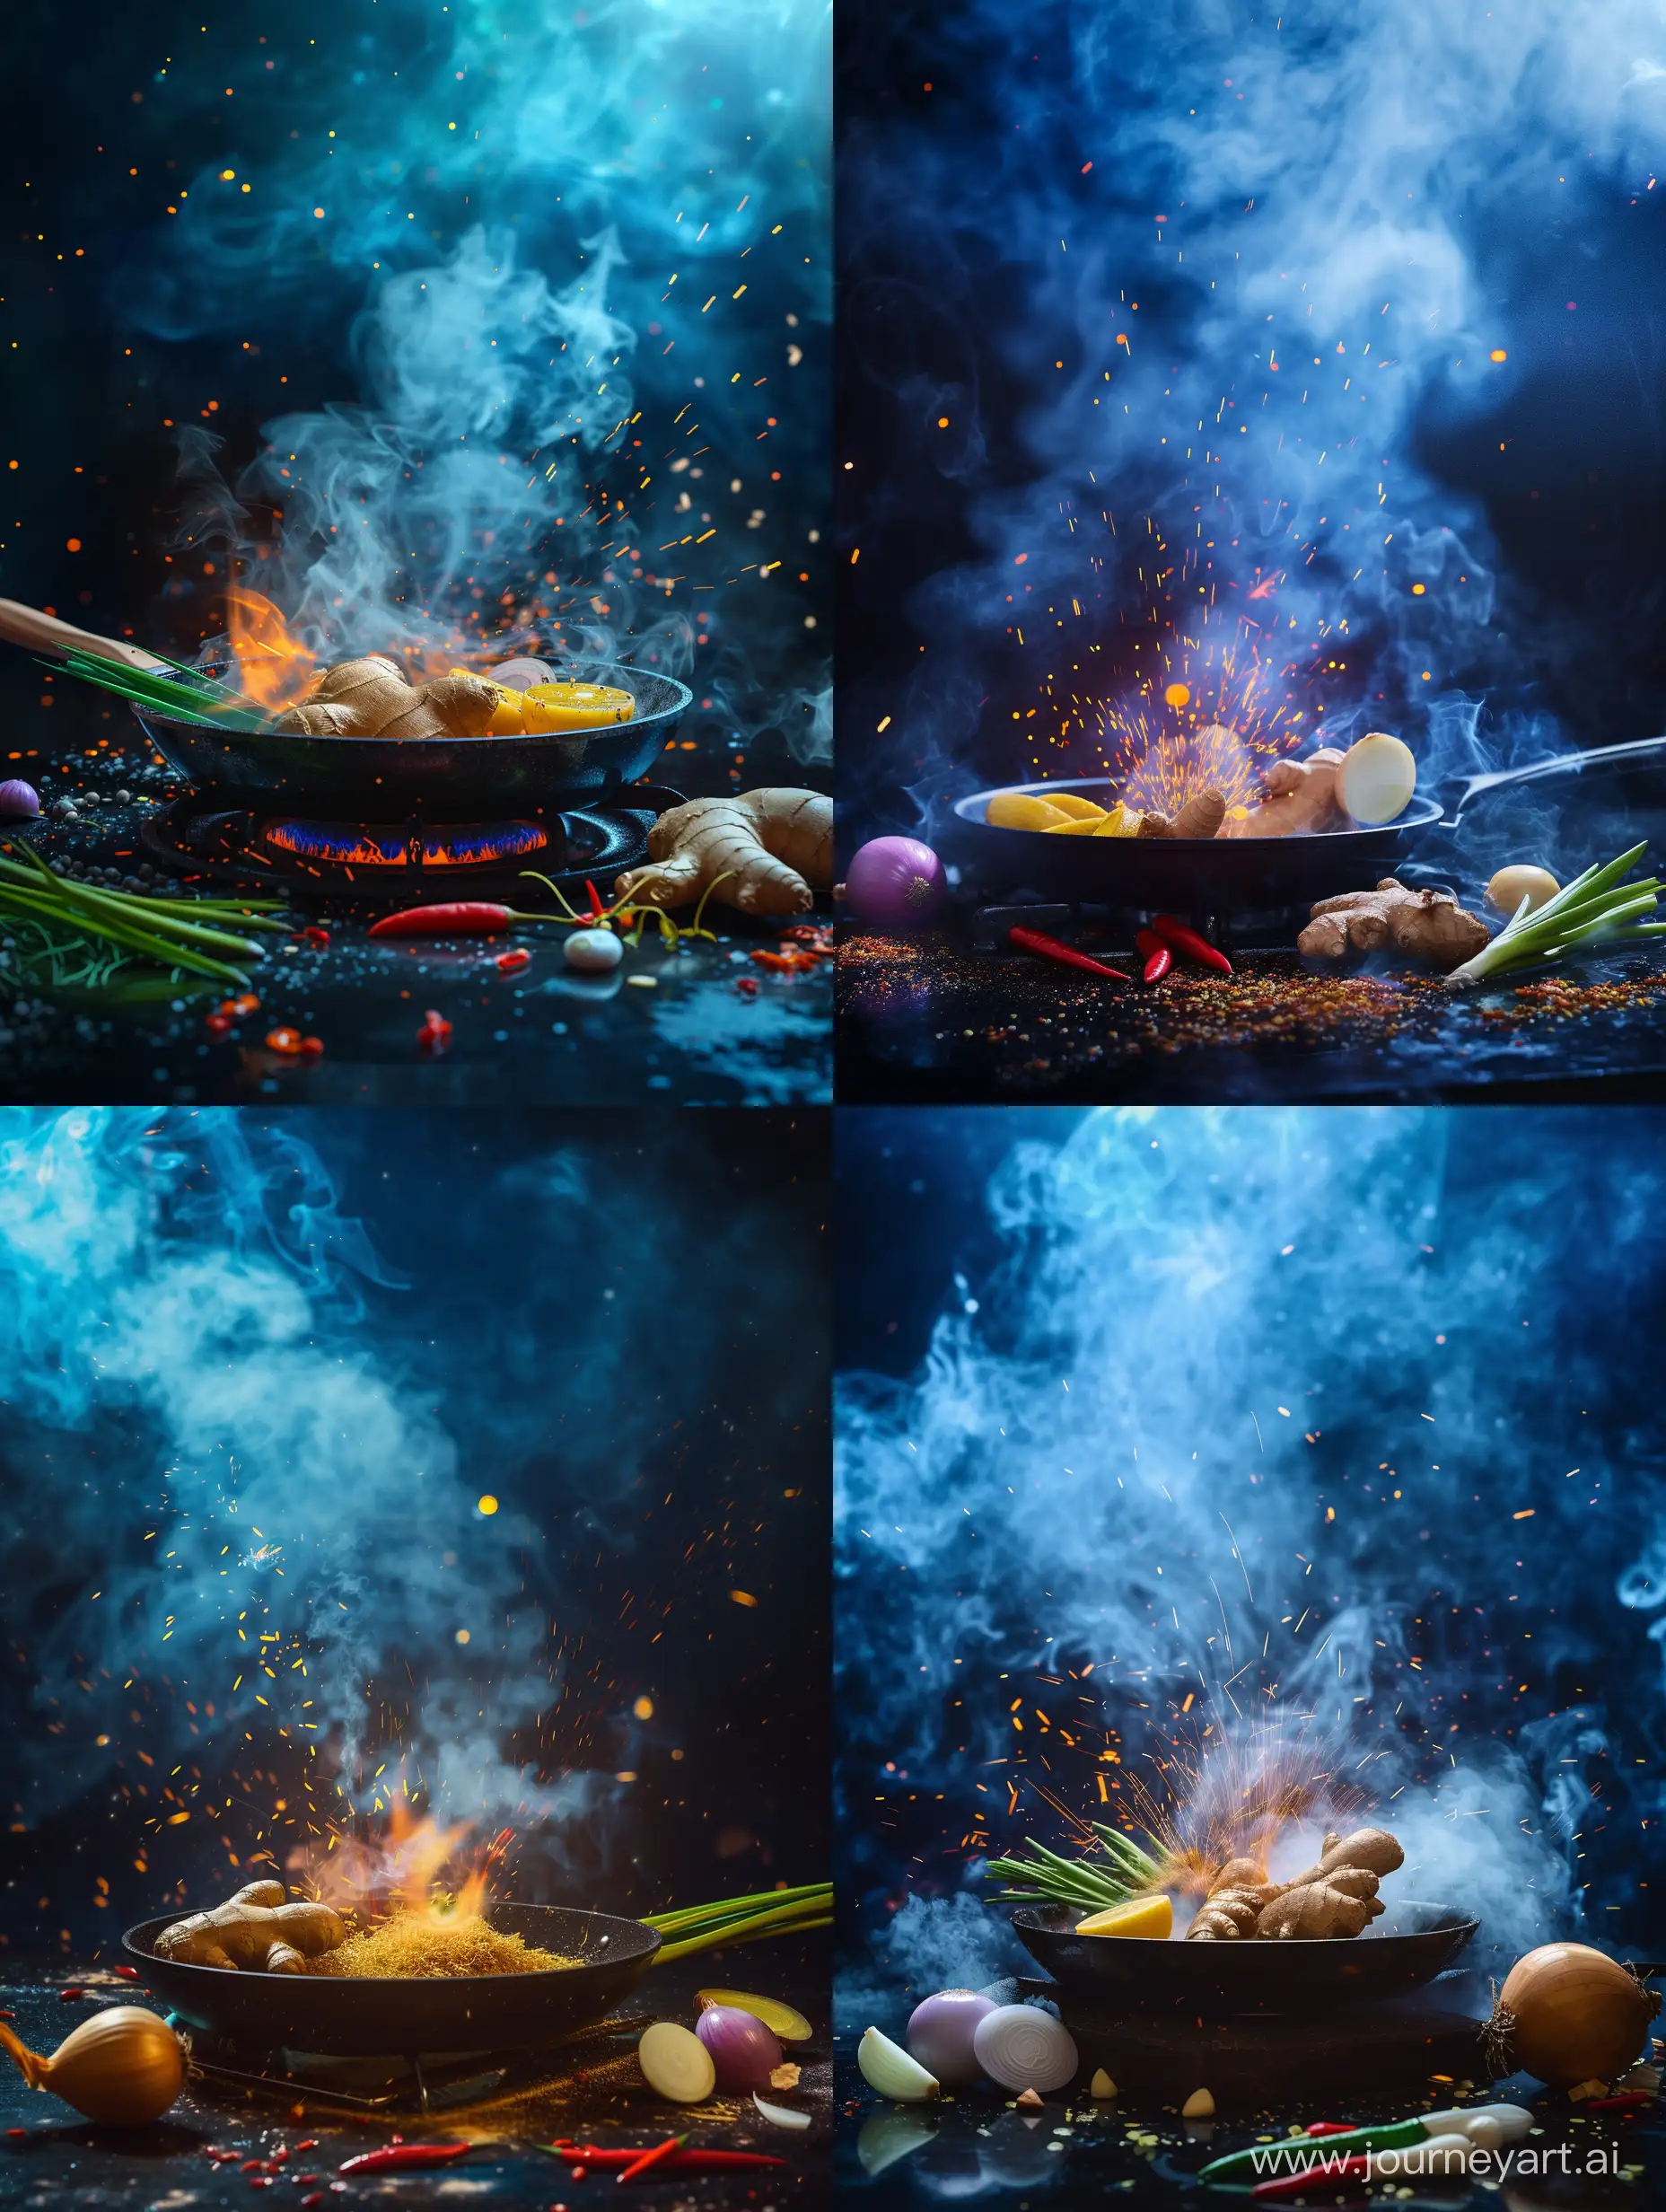 ultra realistic, stove and pan fire. smoke and small sparks. dark atmosphere with blue light behind. there is ginger, lemongrass, onion and chili. canon eos-id x mark iii dslr --v 6.0